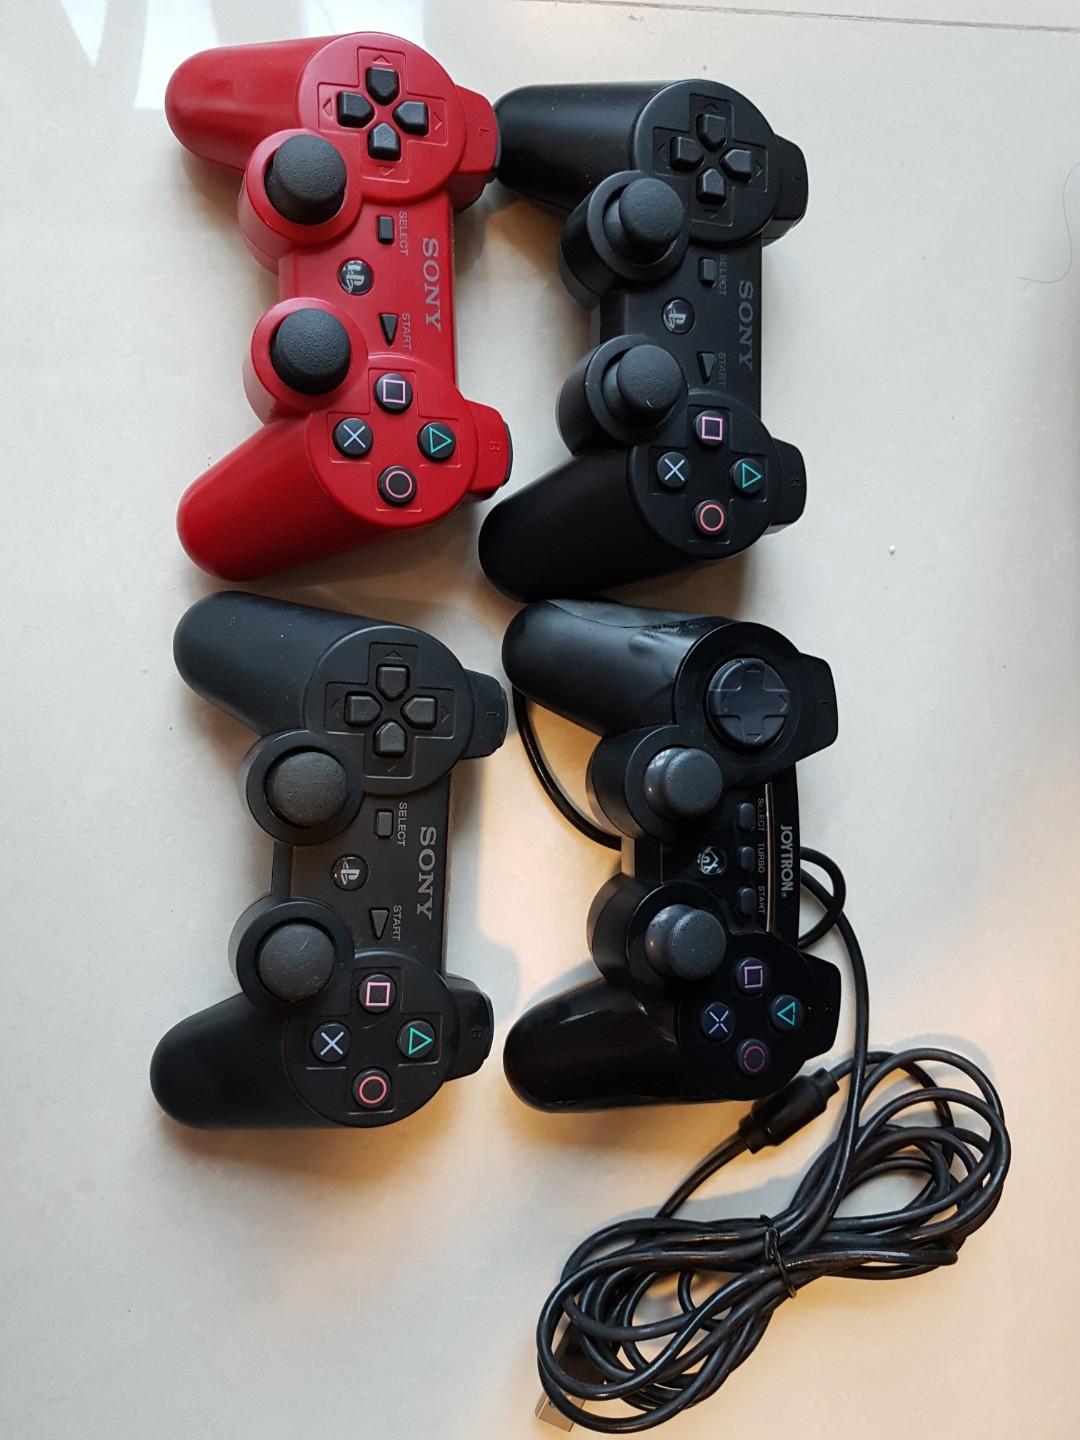 ps3 controllers for sale near me